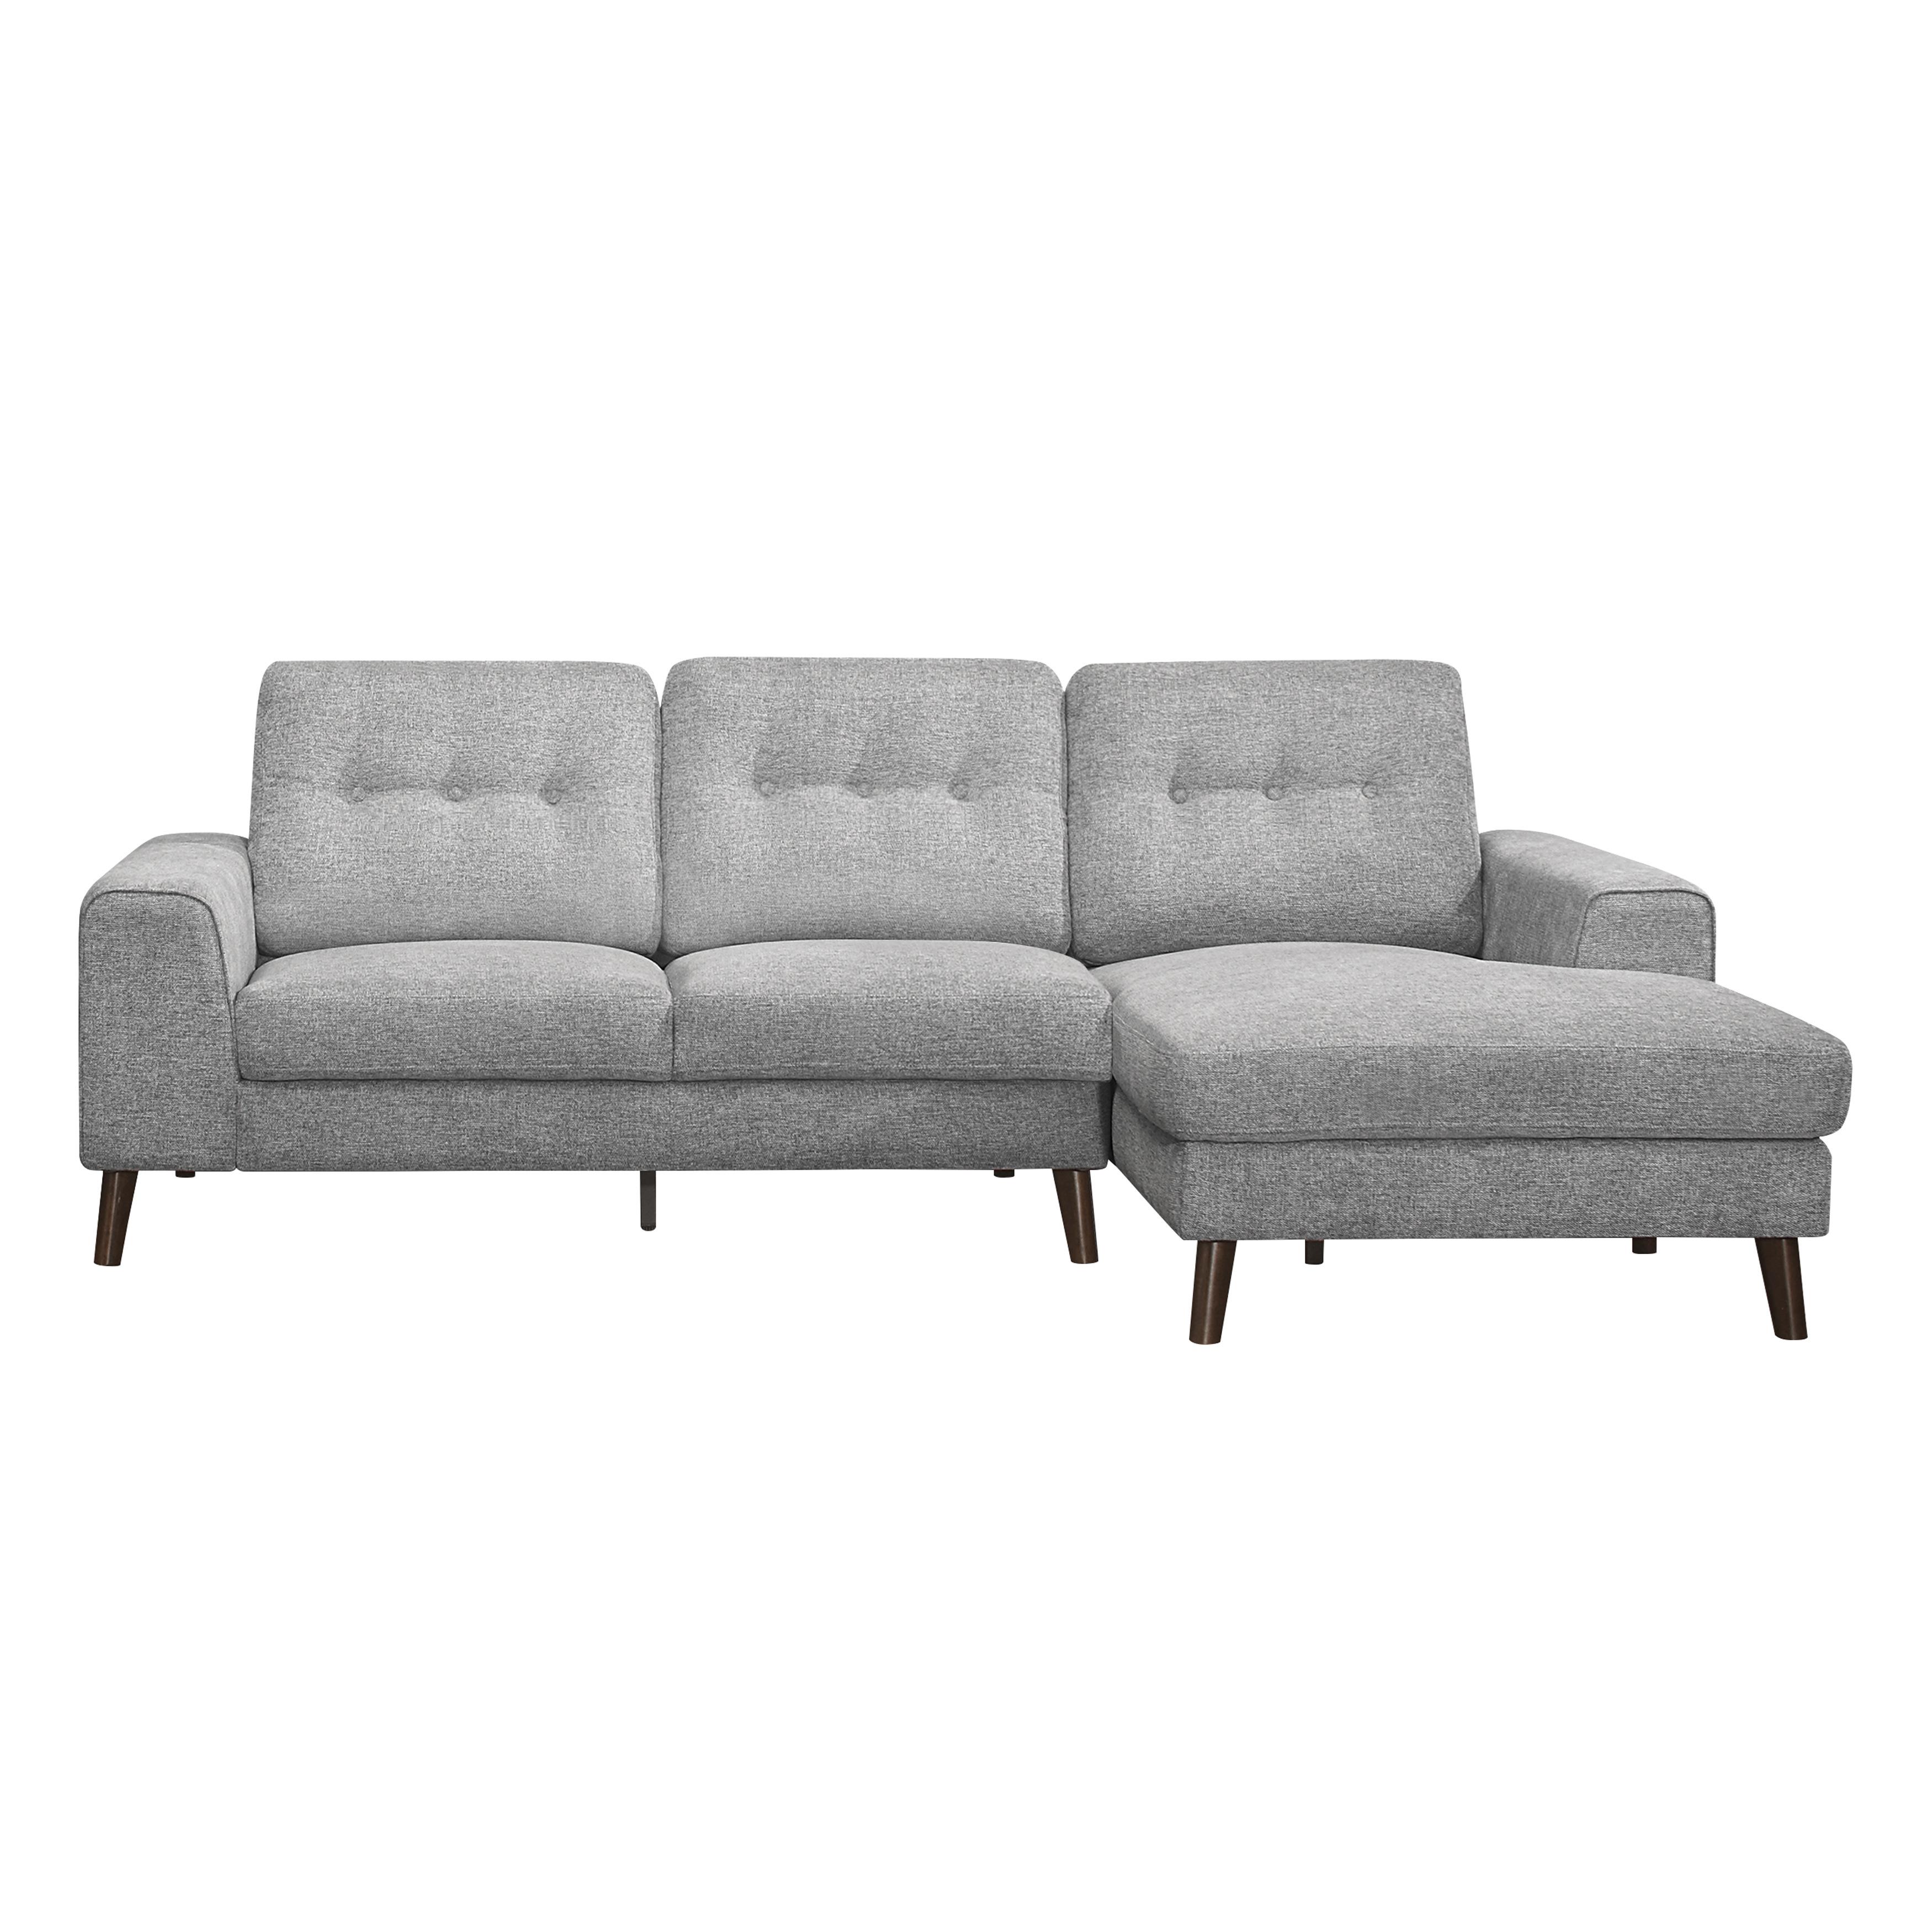 

    
Contemporary Gray Textured 2-Piece Sectional Homelegance 9300GY*SC Alexia
